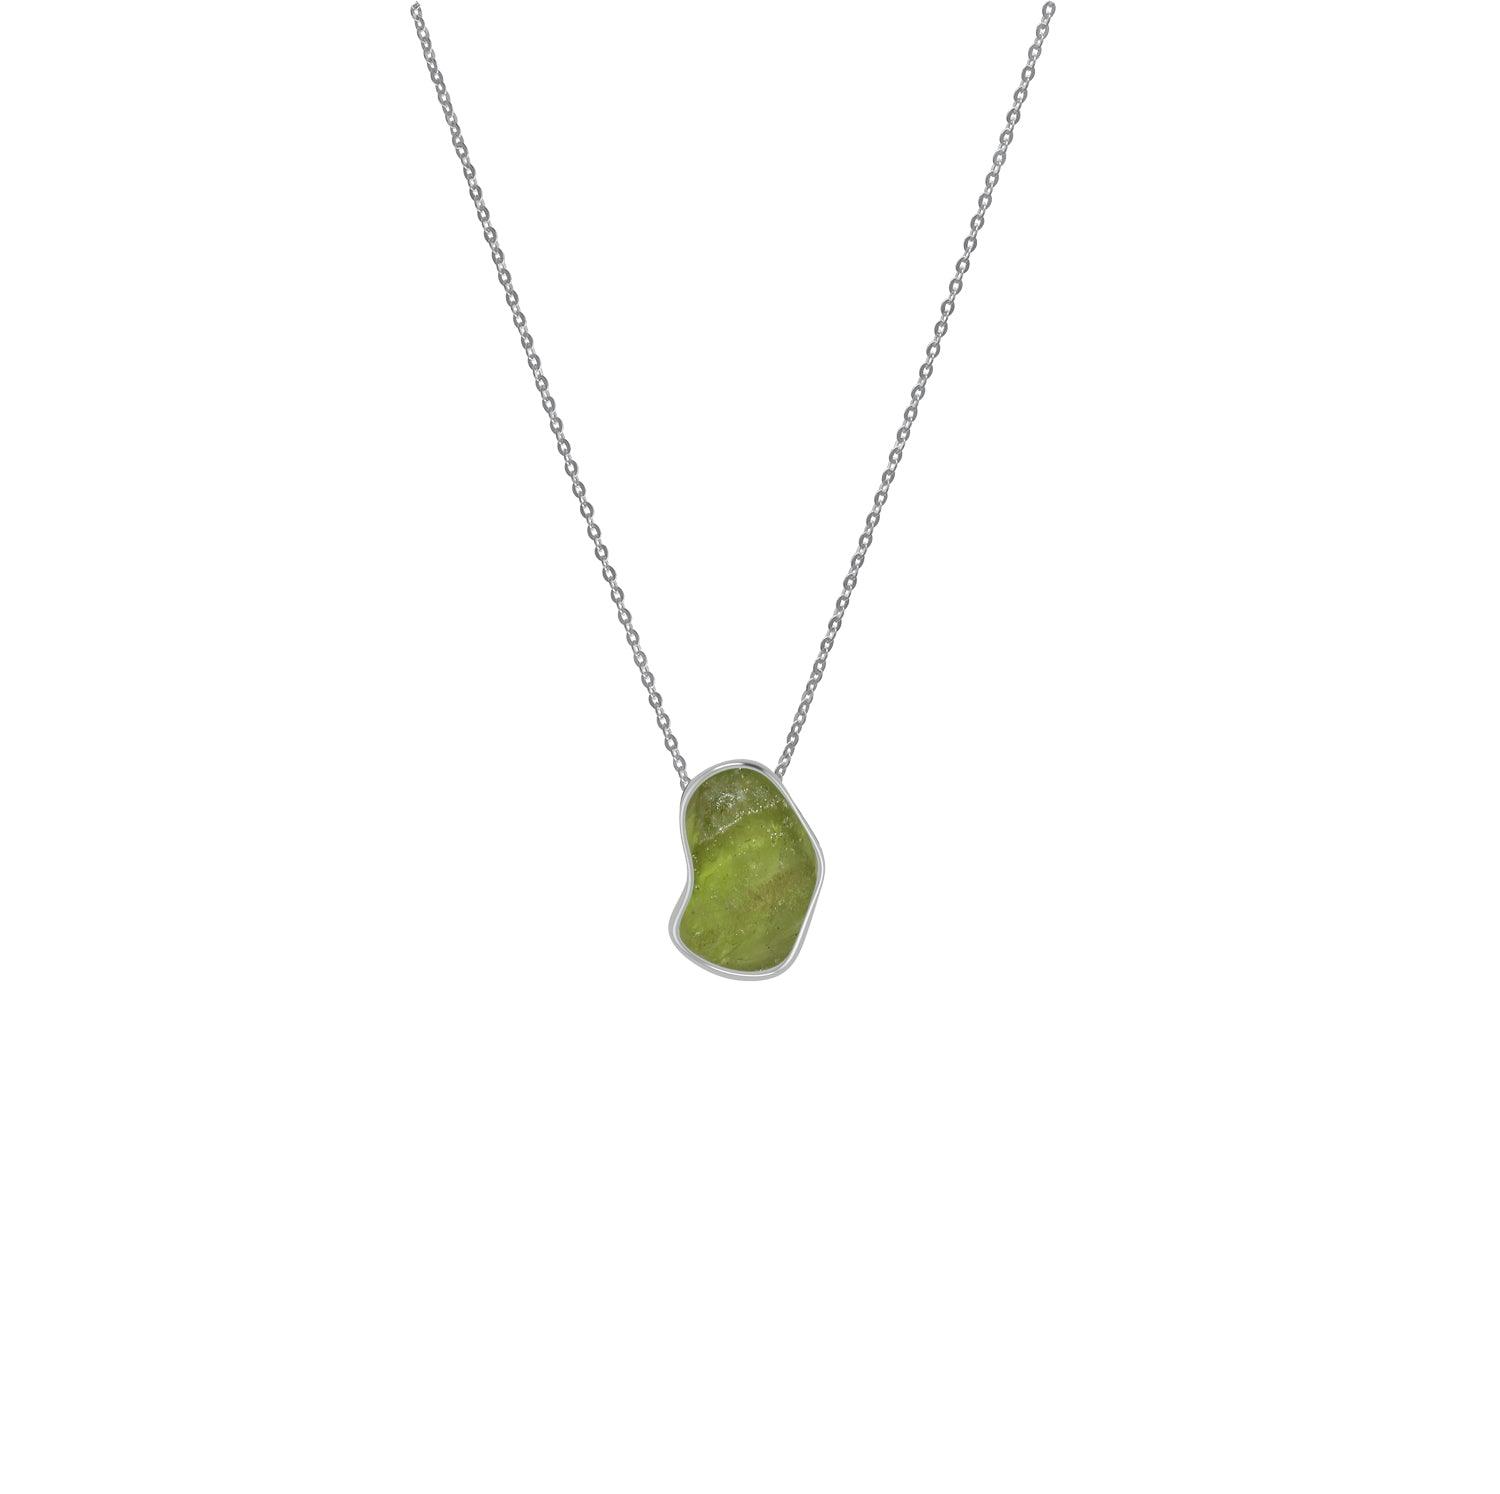 925 Sterling Silver Rough Peridot Slider Necklace With Chain 18" Bezel Set Jewelry Pack of 6